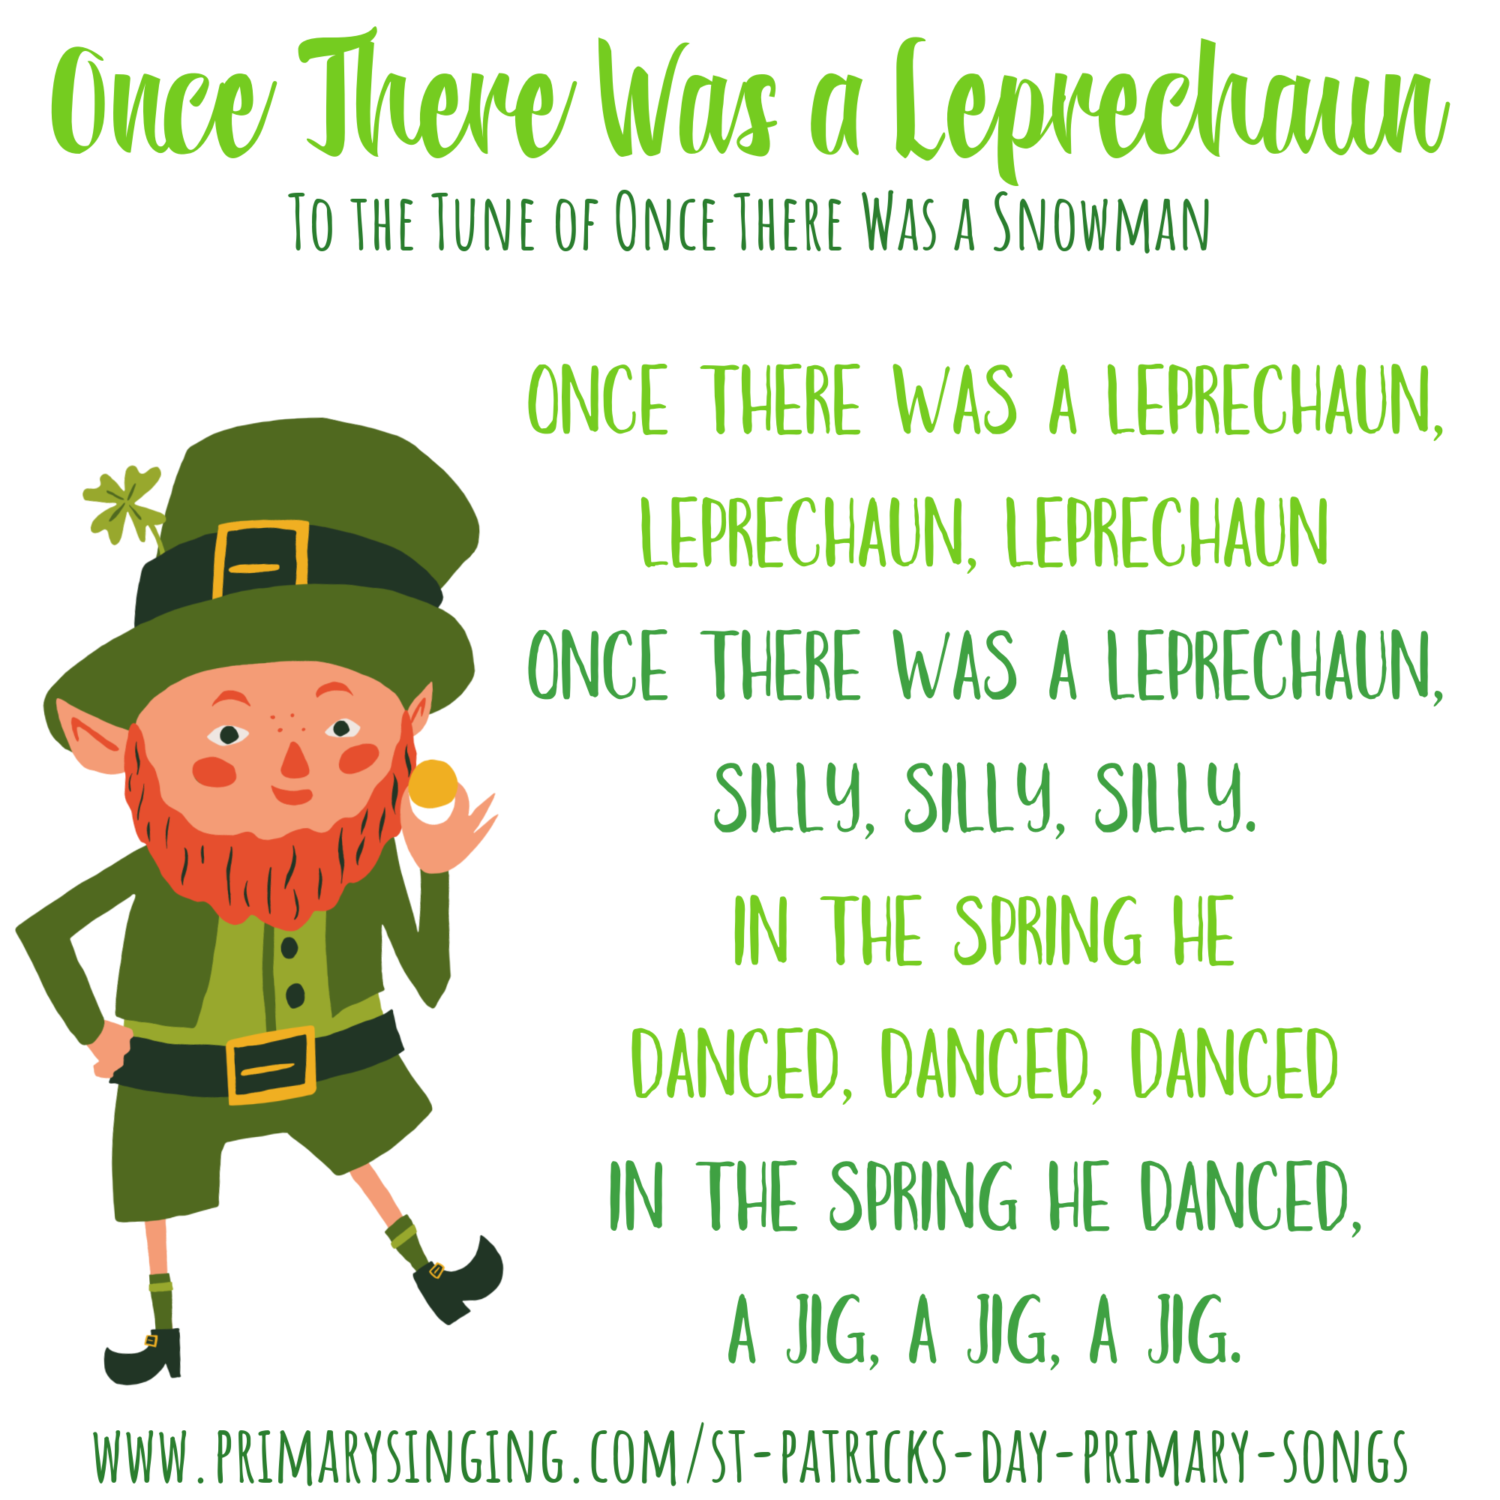 Once there was a Leprechaun and other fun LDS St Patrick's Day Primary songs!